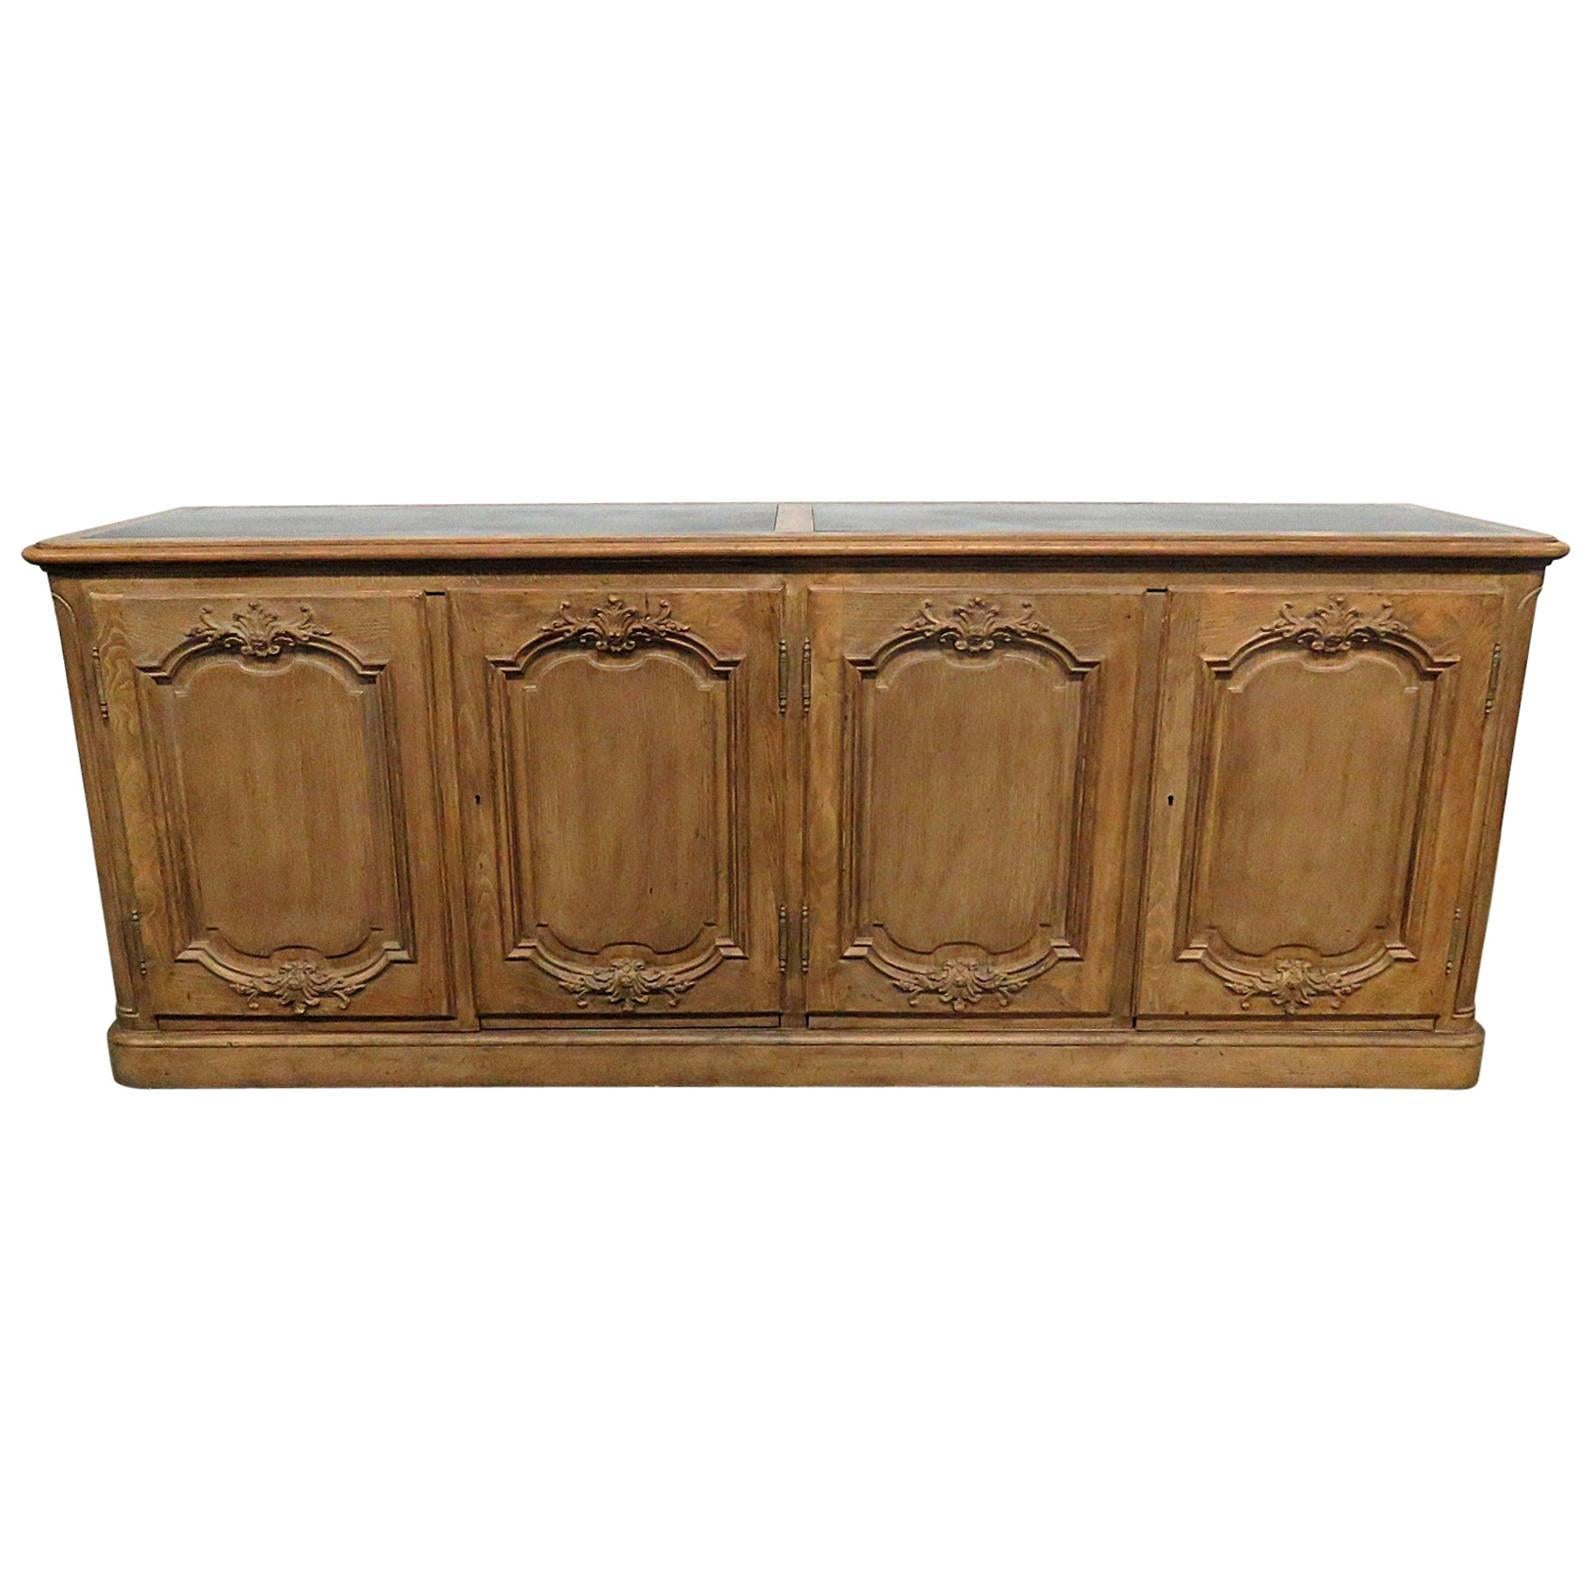 Baker Furniture Country French Style Sideboard Buffet Server